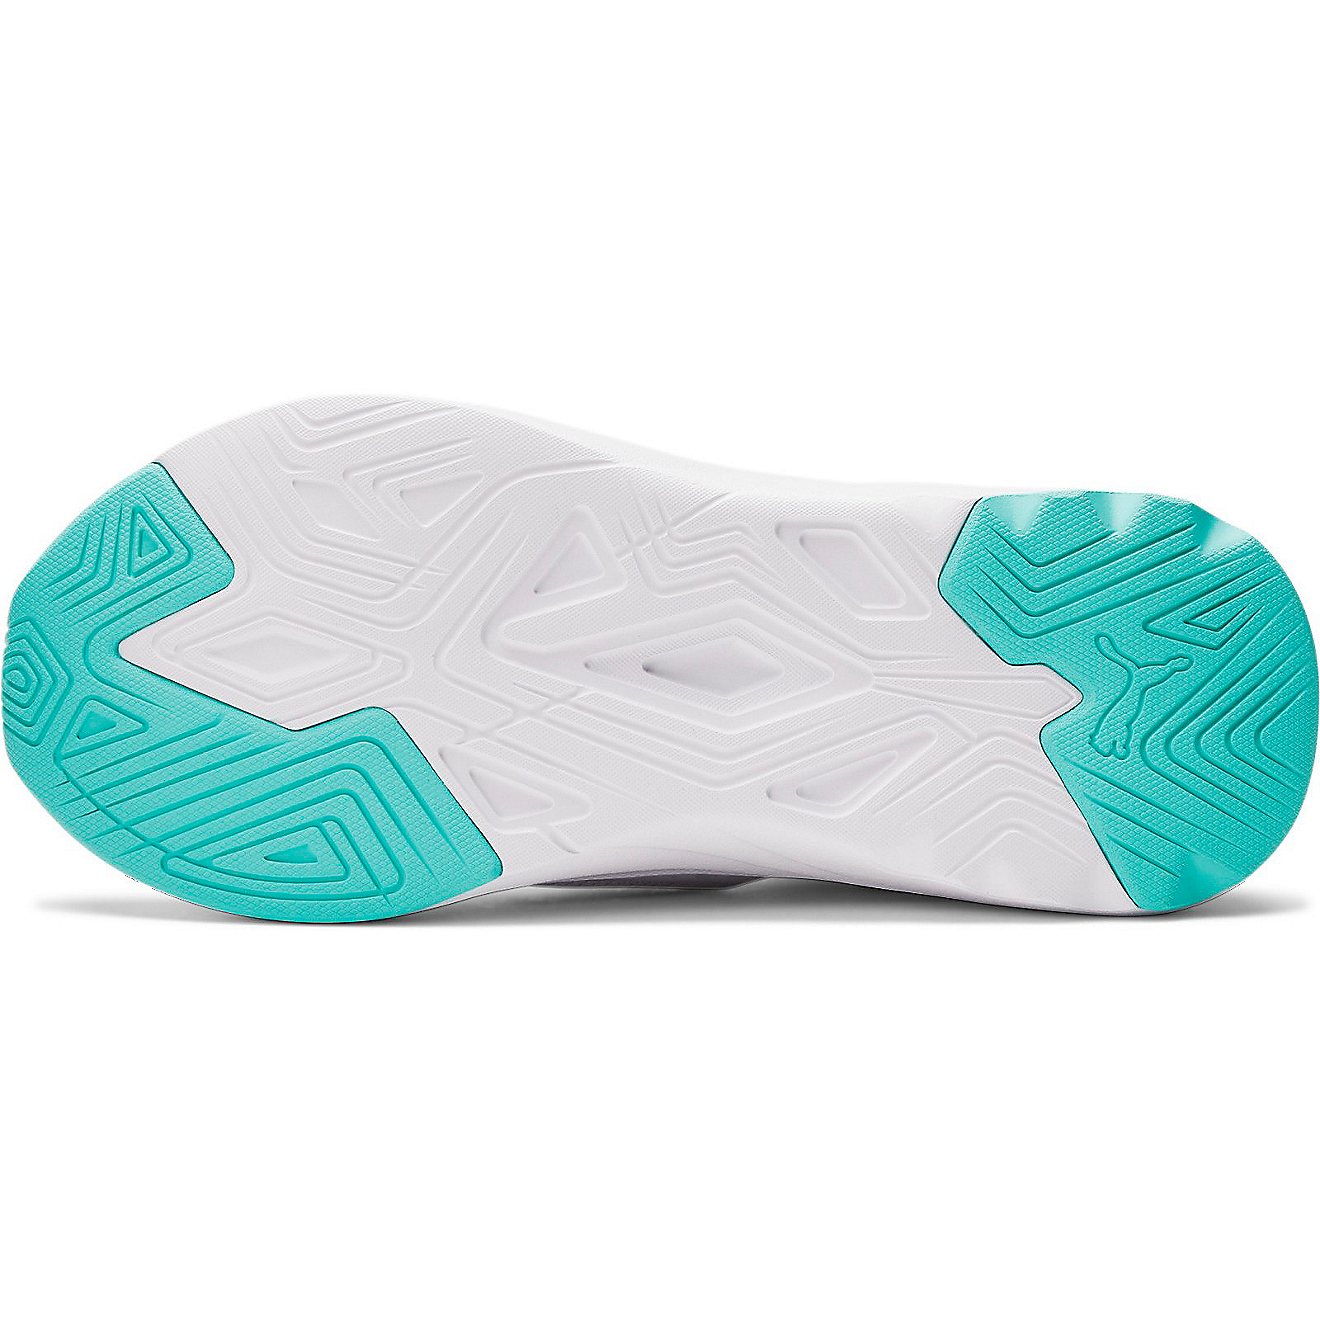 PUMA Women's Softride Sophia Shoes | Free Shipping at Academy